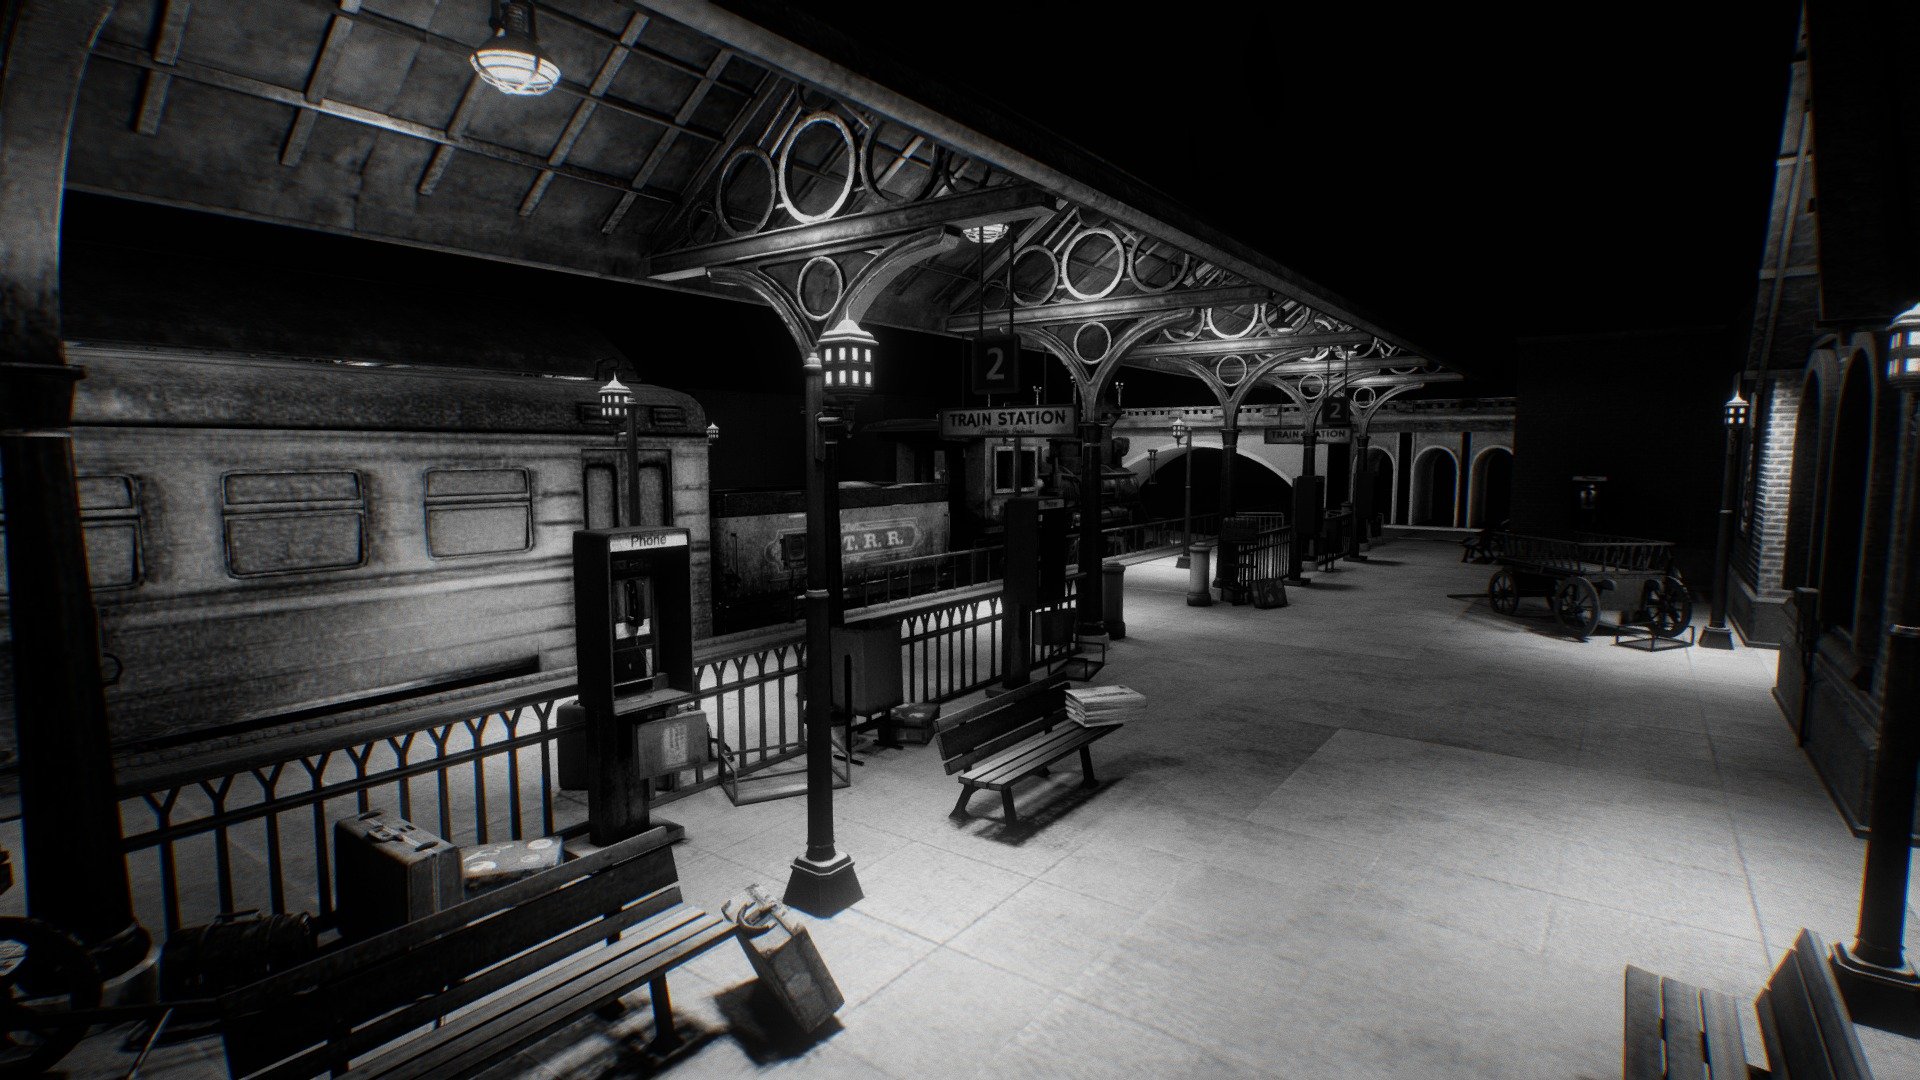 This is a Train Station created especially for virtual spaces, optimized for mobiles and augmented reality.
Some resources shown here are for external use.
This scenario is in real scale, measured in meters.
we can bring the spaces into Unity 
visit our new website:  https://www.marcovirtual-mx.com/

Modeling/Baking: Blender

Textured: Substance Painter

Texture Size: 4k - 1k

If you need personalized 3d models or scenarios contact us: marco.virtual.mx@gmail.com - Train Station |Baked| VR Ready - Buy Royalty Free 3D model by Marco Virtual MX (@marco_virtual) 3d model